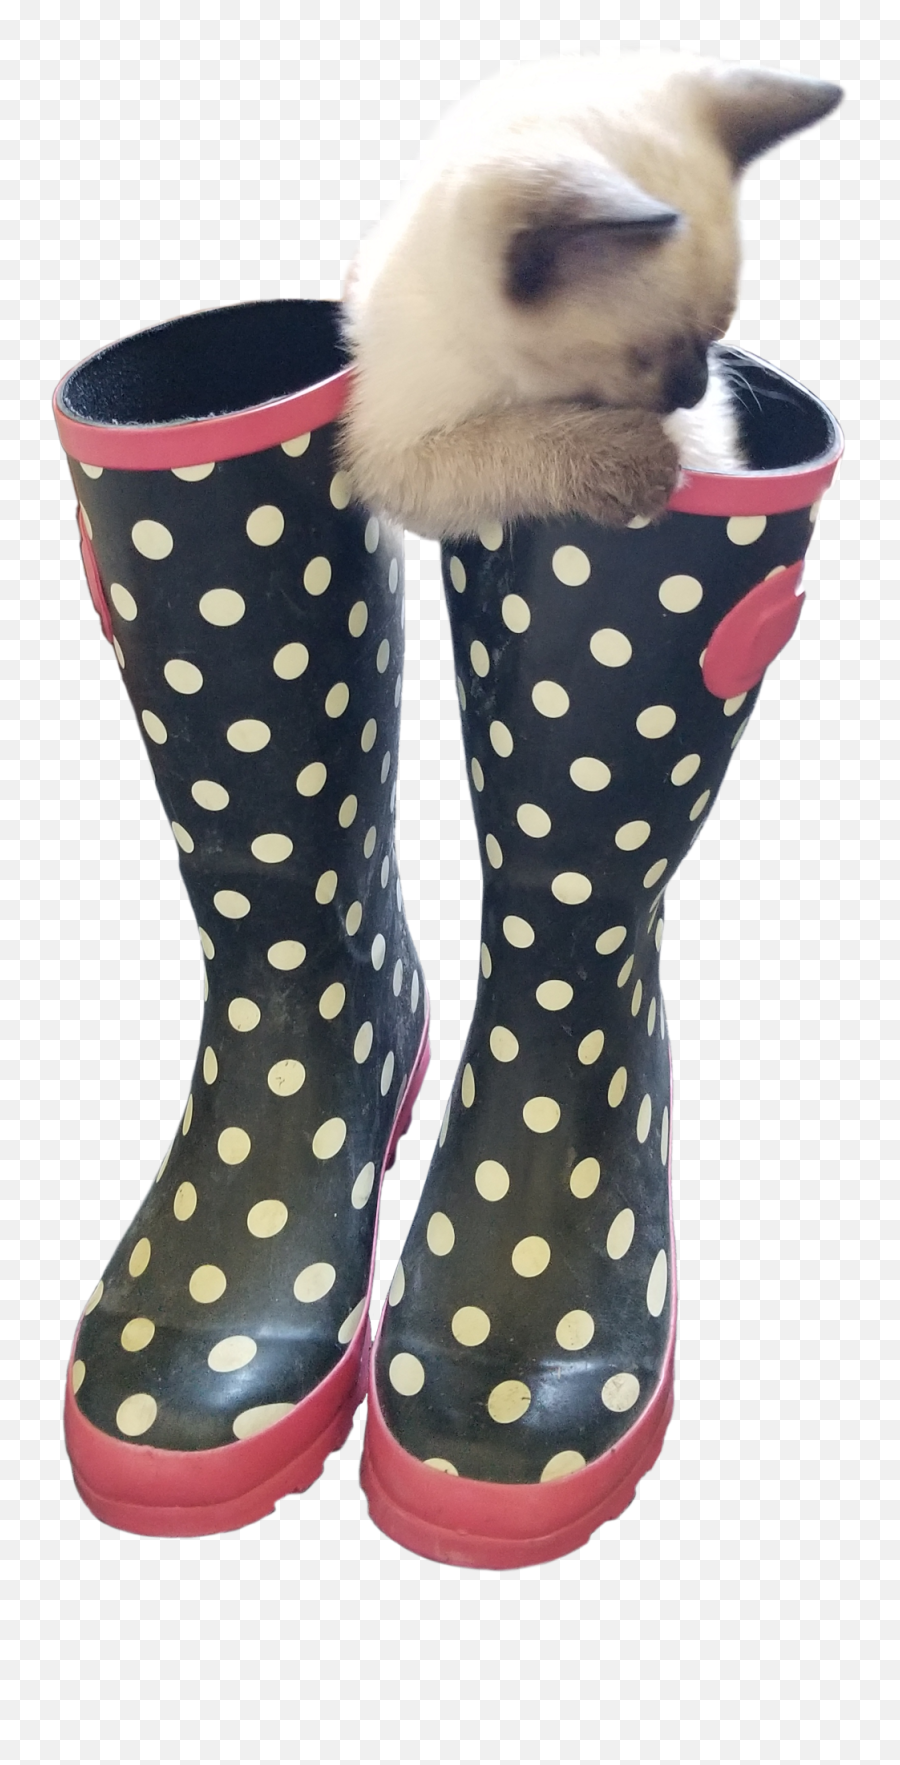 Cat In Boots Of The Just A Cat Bro Collection 27 Of 32 Emoji,Goose Emoji Copy Paste